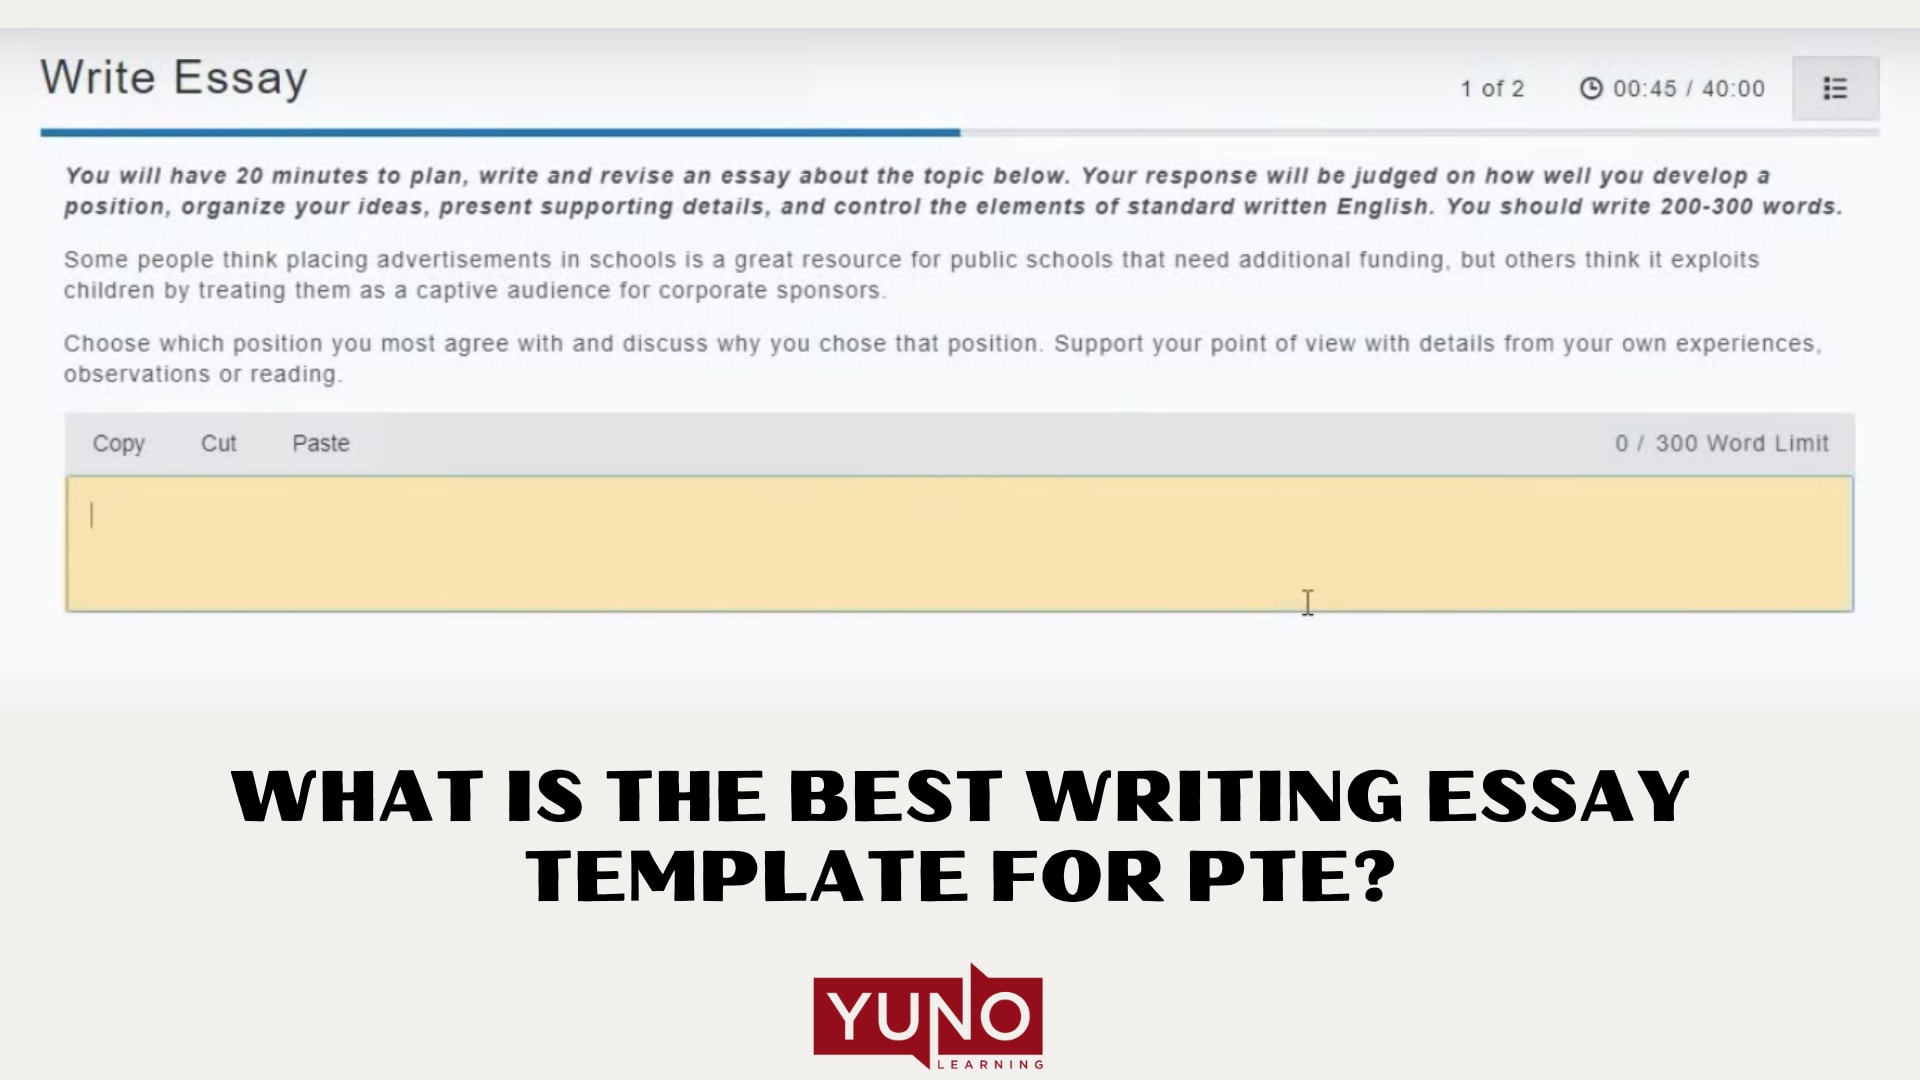 pte essay template one of the most